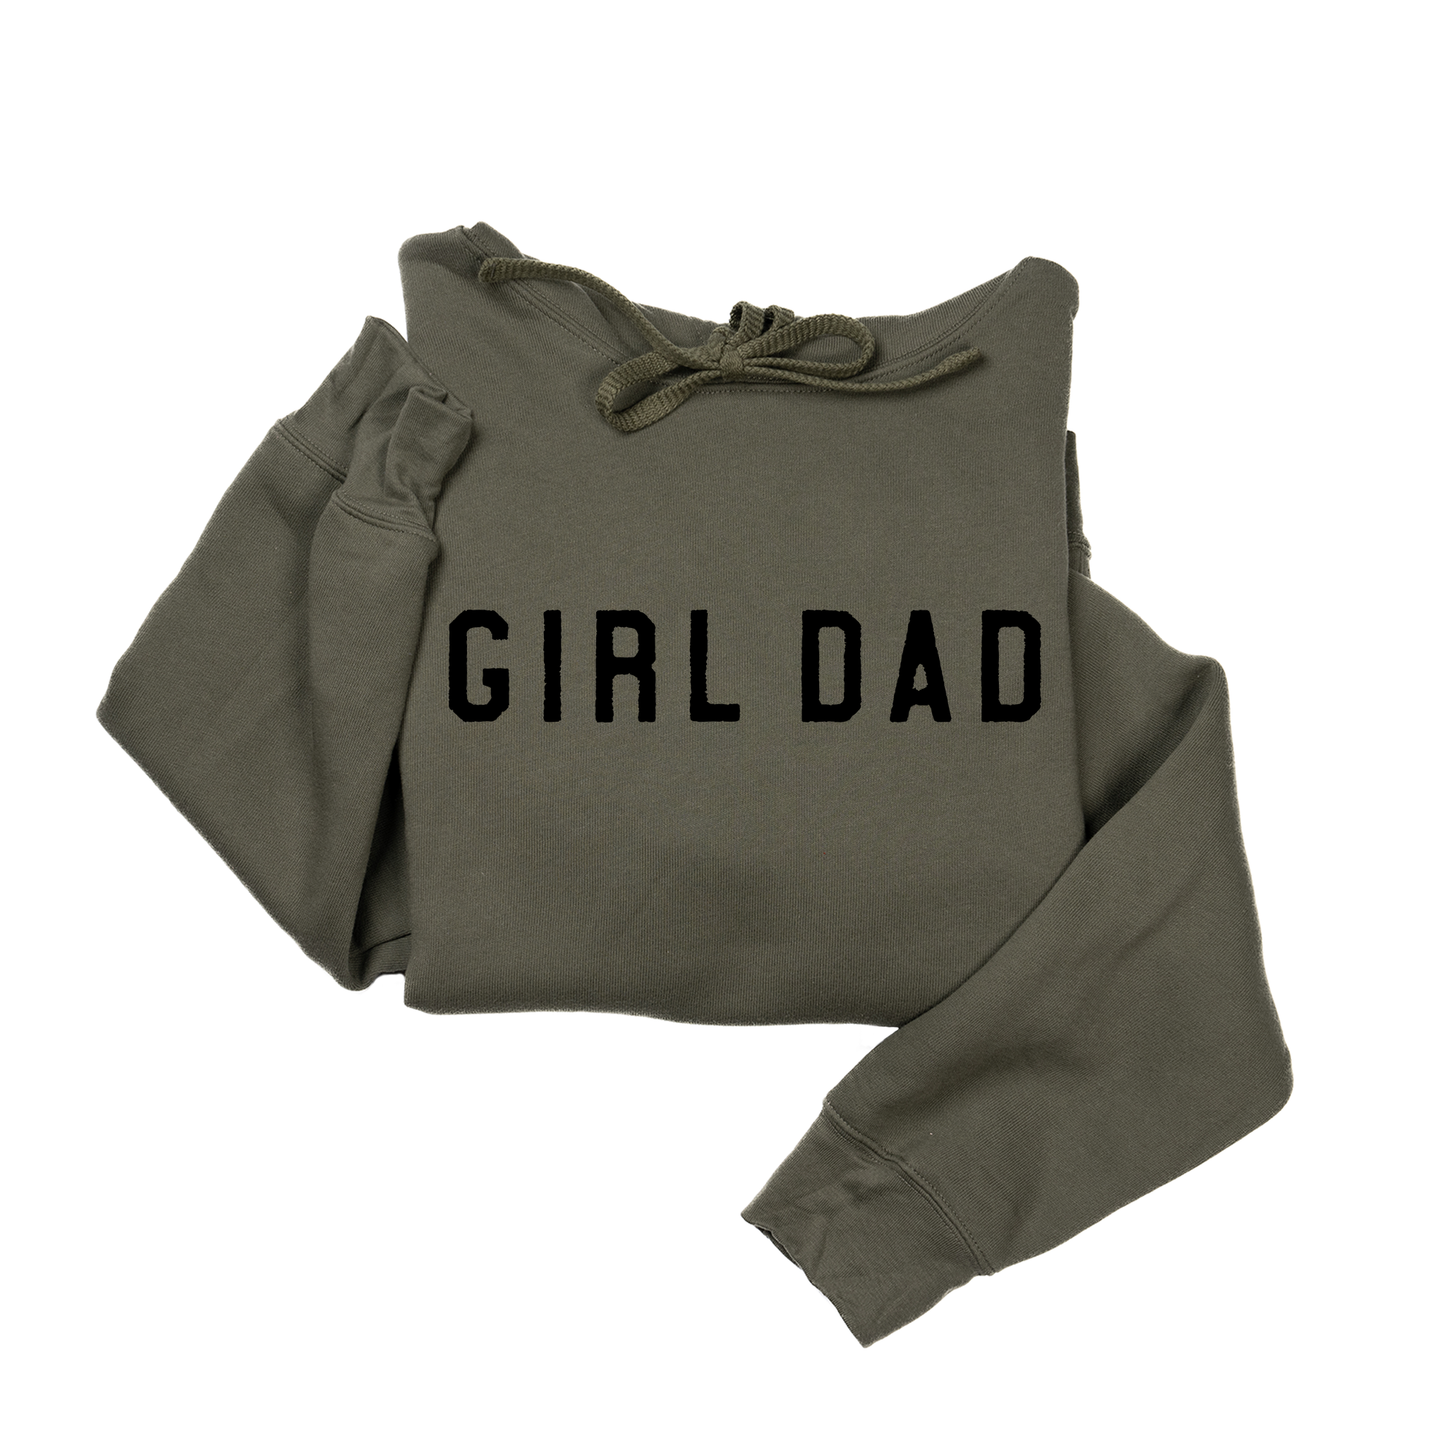 Girl Dad® (Across Front, Black) - Hoodie (Military Green)